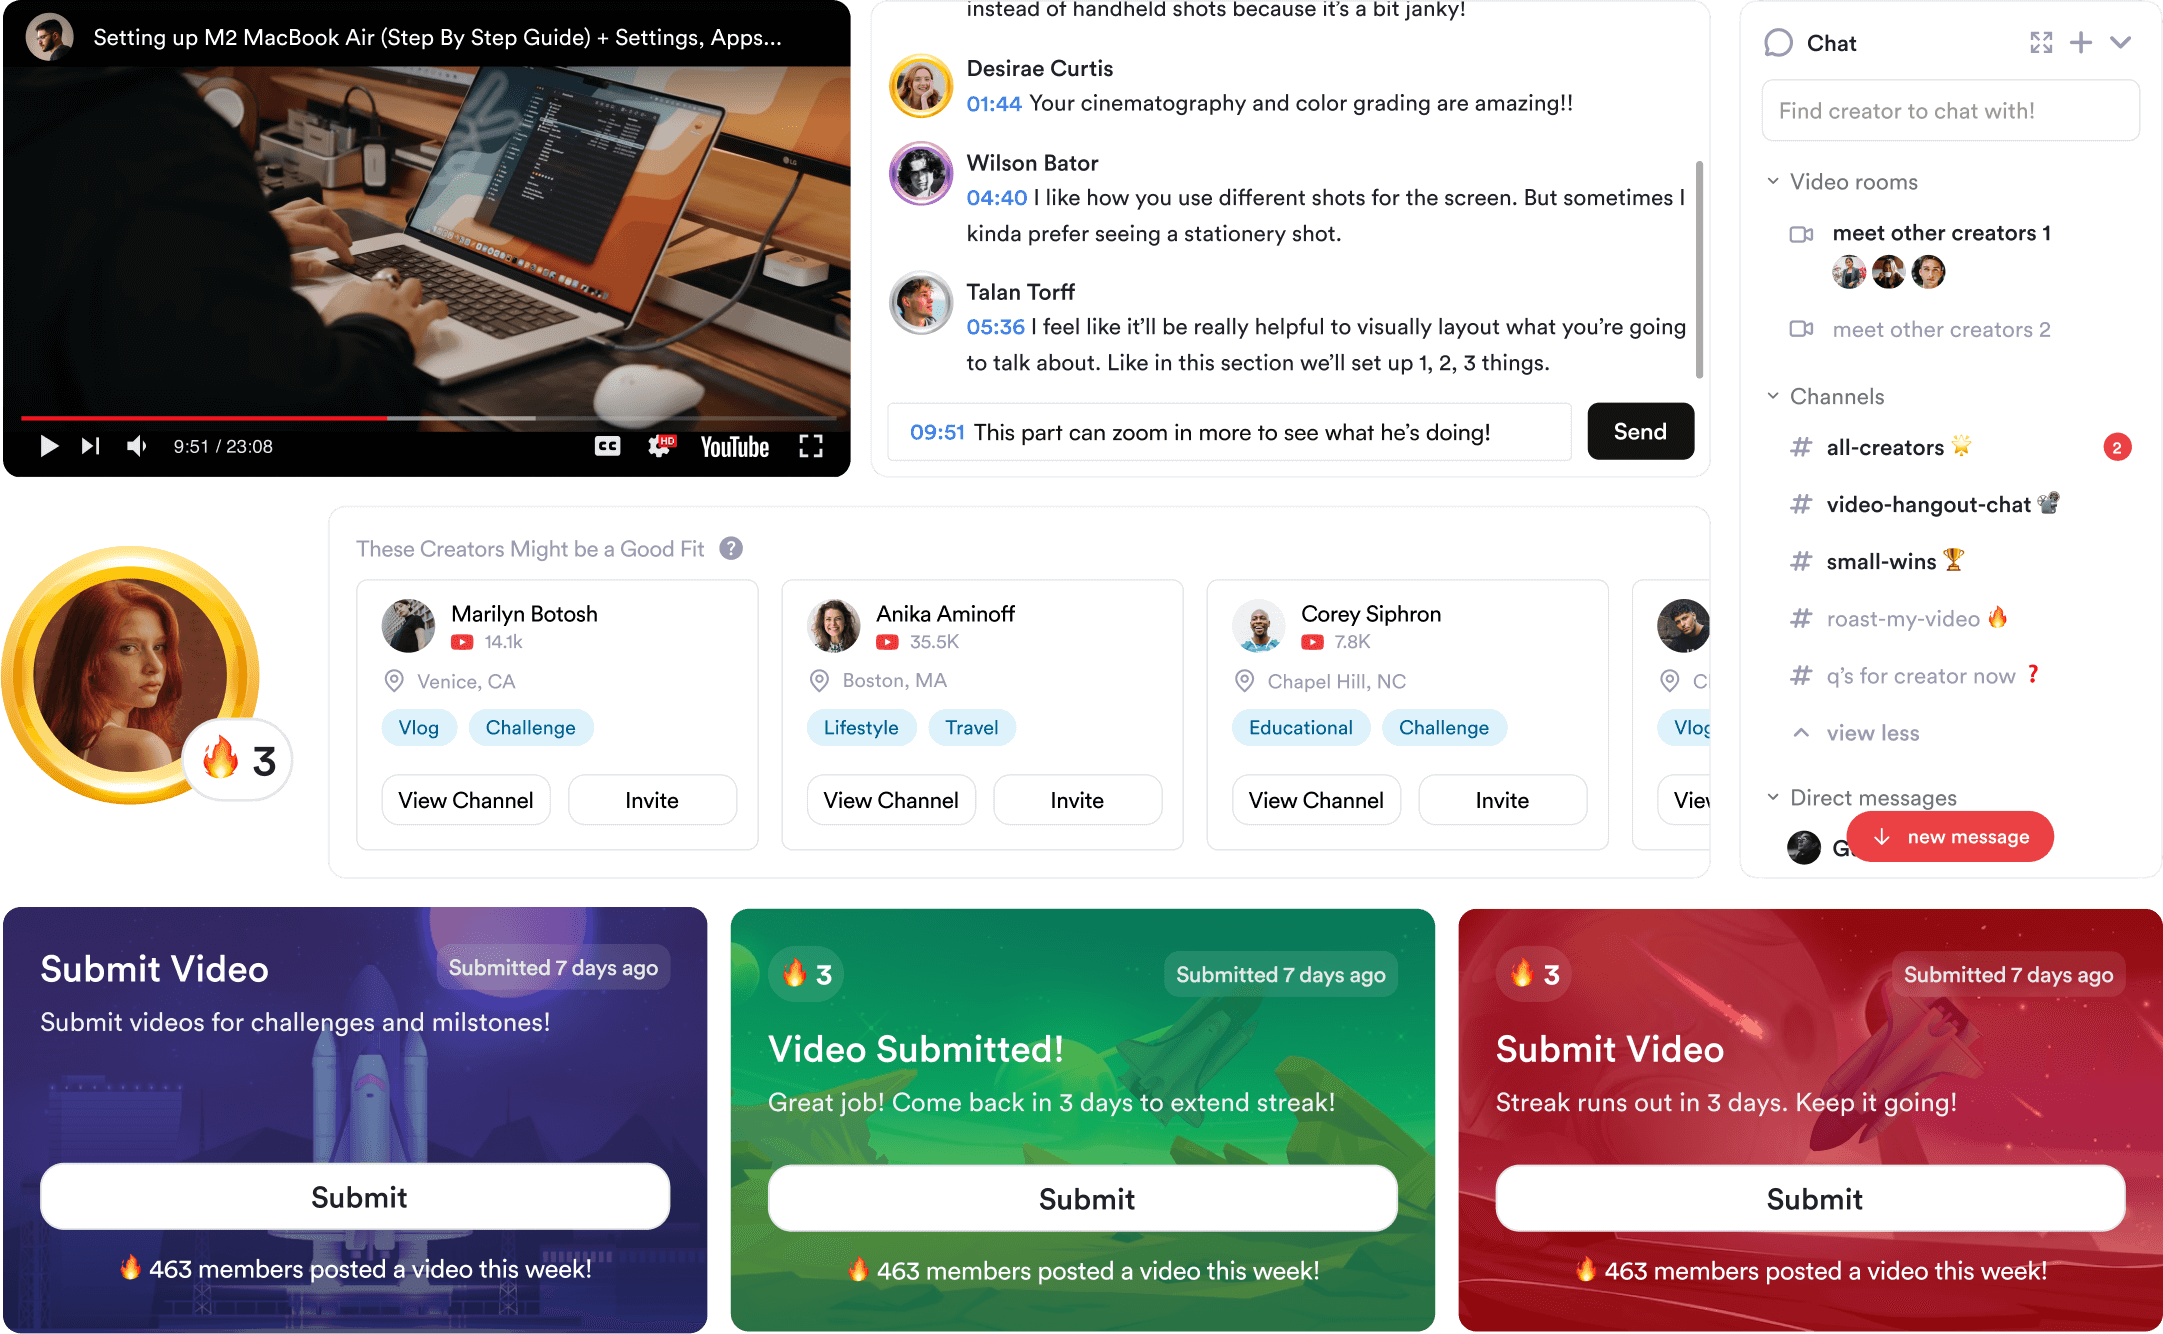 Gallery of the main features which includes video feedback tool, weekly streaks, chat, and creator recommendations